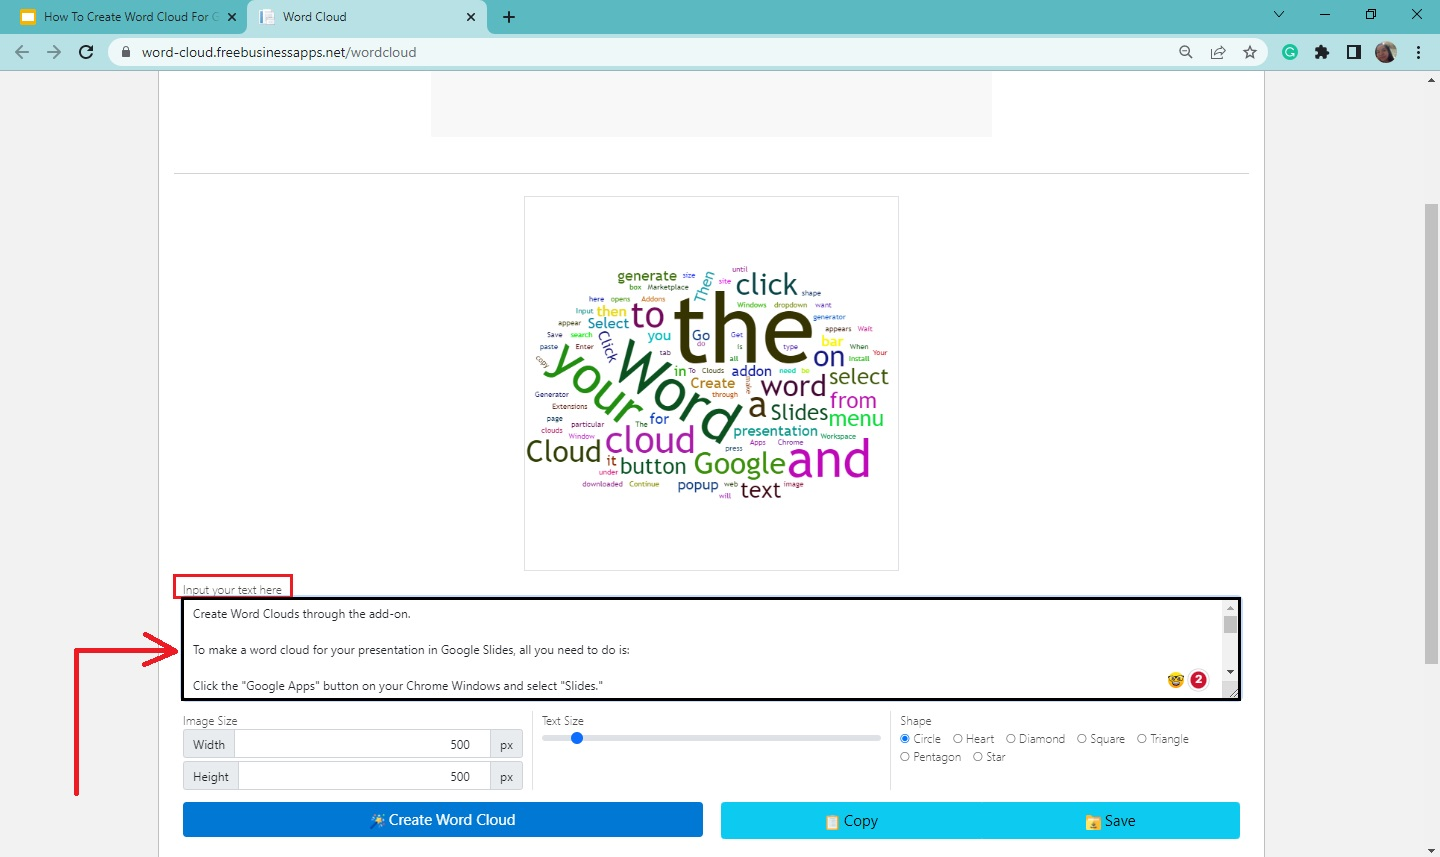 Copy and paste the words you want to appear on your word cloud under the text box "Input your text here."